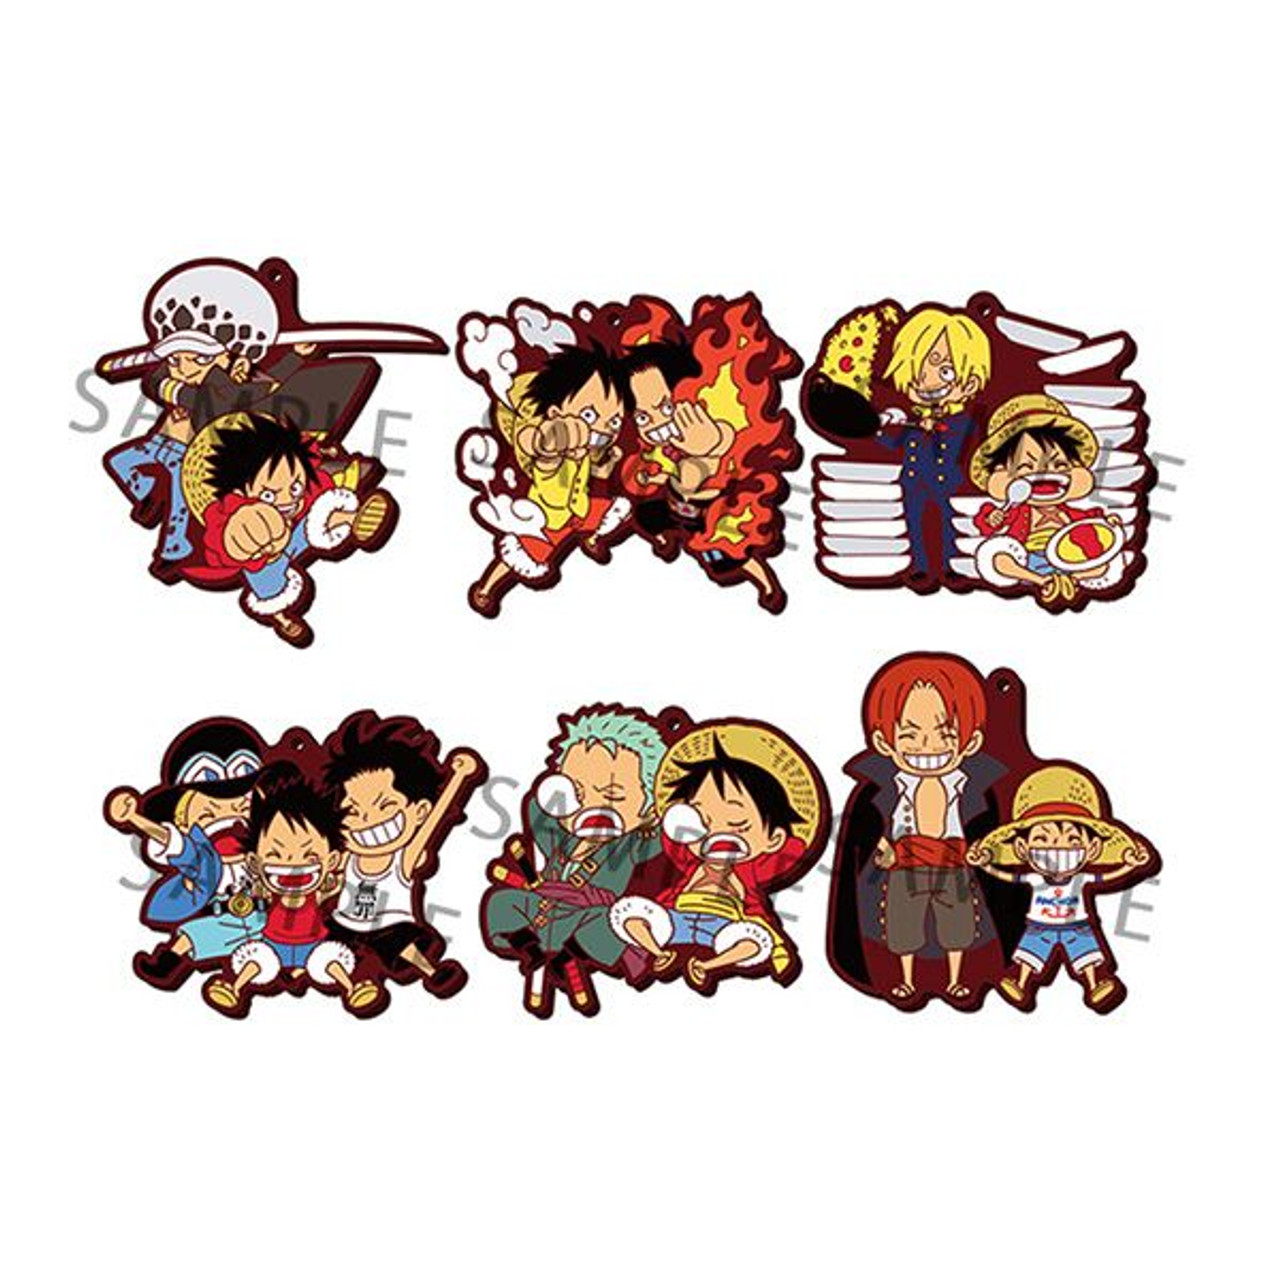 Rubber Mascot Buddy Colle One Piece Luffy Special! 6pcs Box